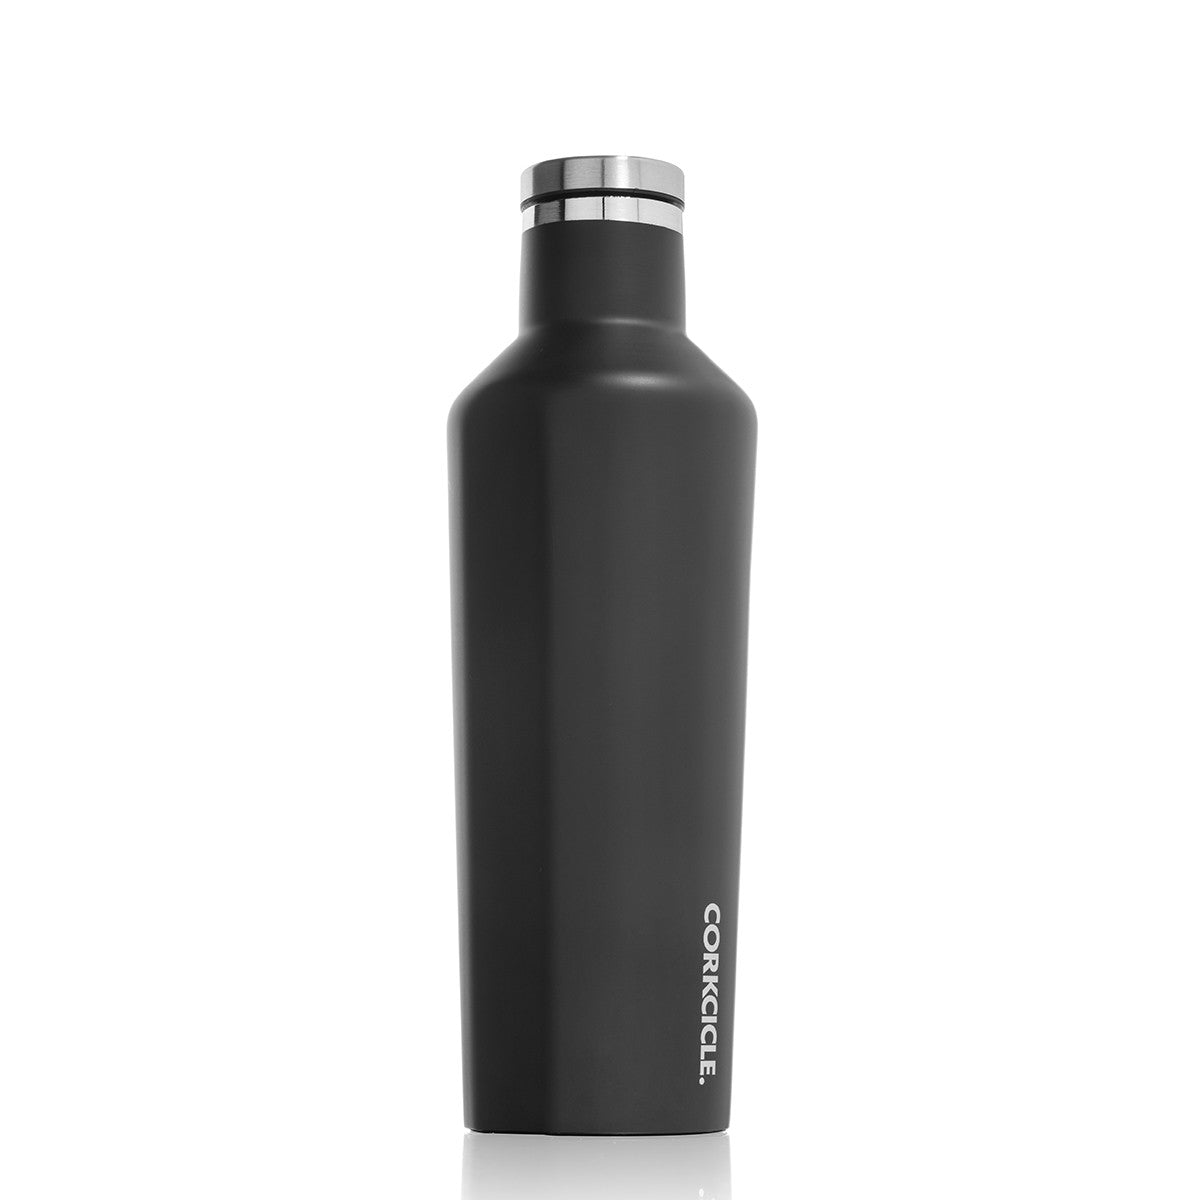 Corkcicle Classic Canteen 475ml - Matt Black Insulated Stainless Steel Drink Bottle